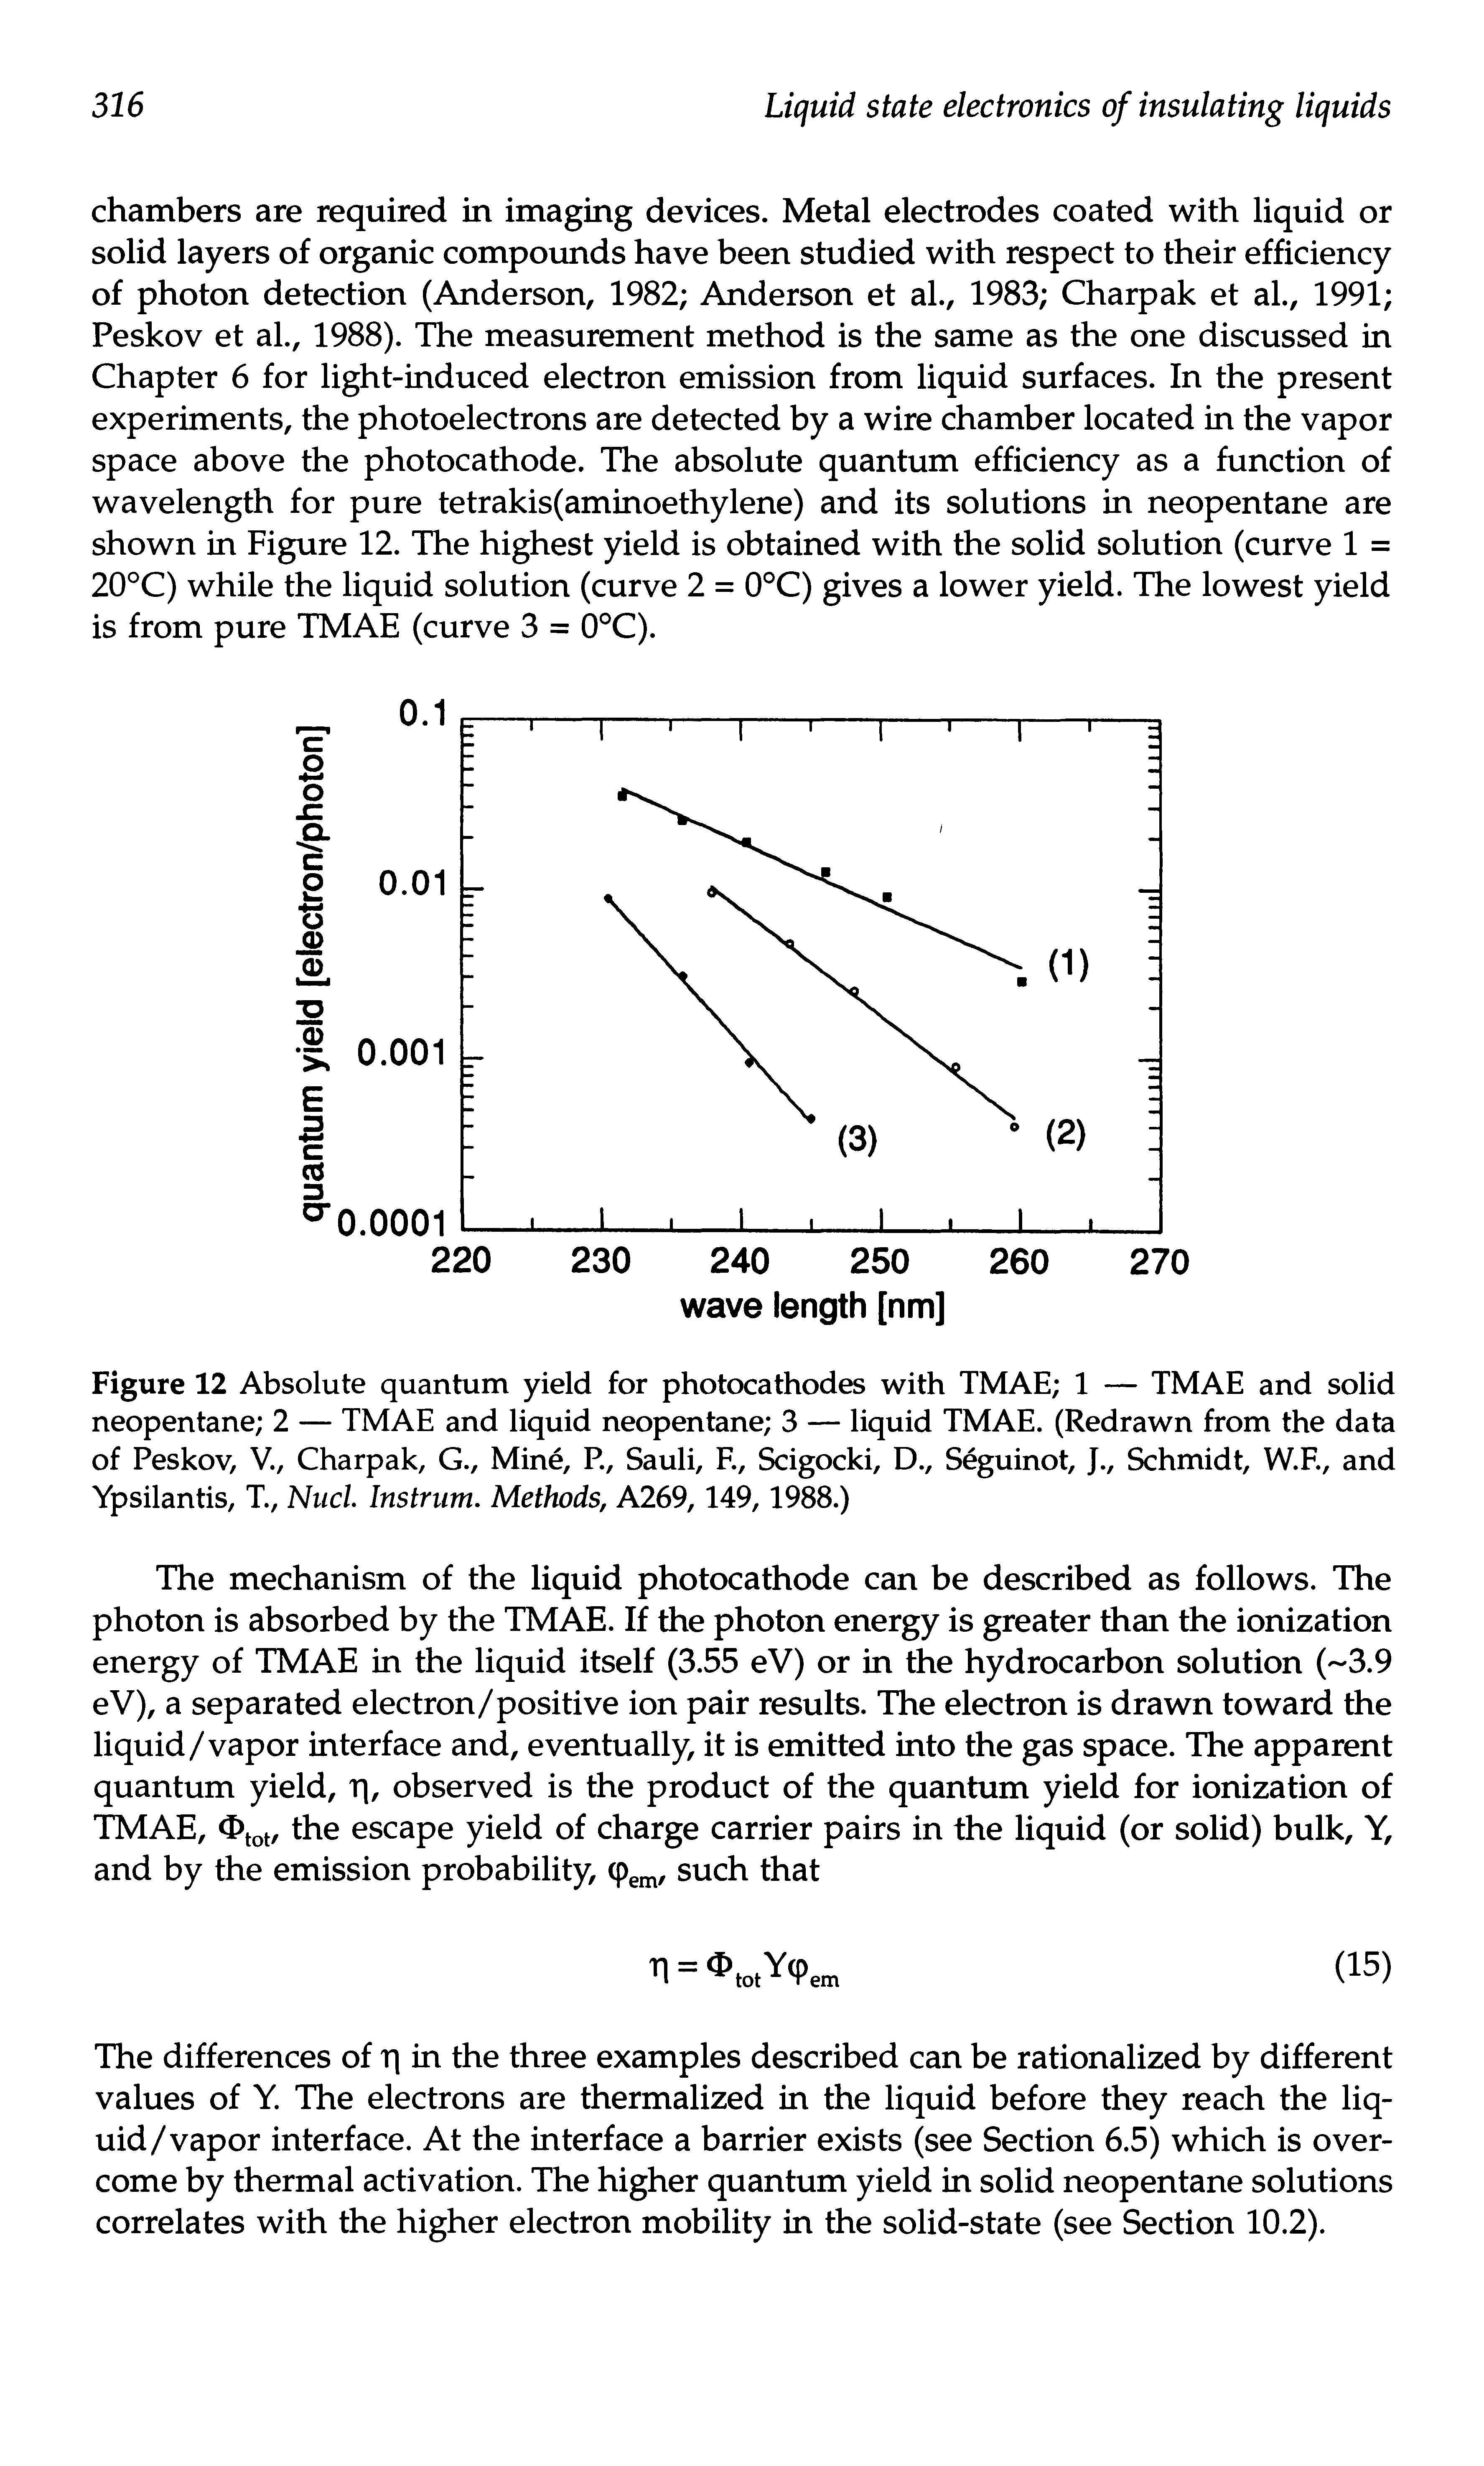 Figure 12 Absolute quantum yield for photocathodes with TMAE 1 — TMAE and solid neopentane 2 — TMAE and liquid neopentane 3 — liquid TMAE. (Redrawn from the data of Peskov, V., Charpak, G., Min P/ Sauli, F., Scigocki, D., Seguinot, J., Schmidt, W.F., and Ypsilantis, T., Nucl Instrum, Methods, A269,149,1988.)...